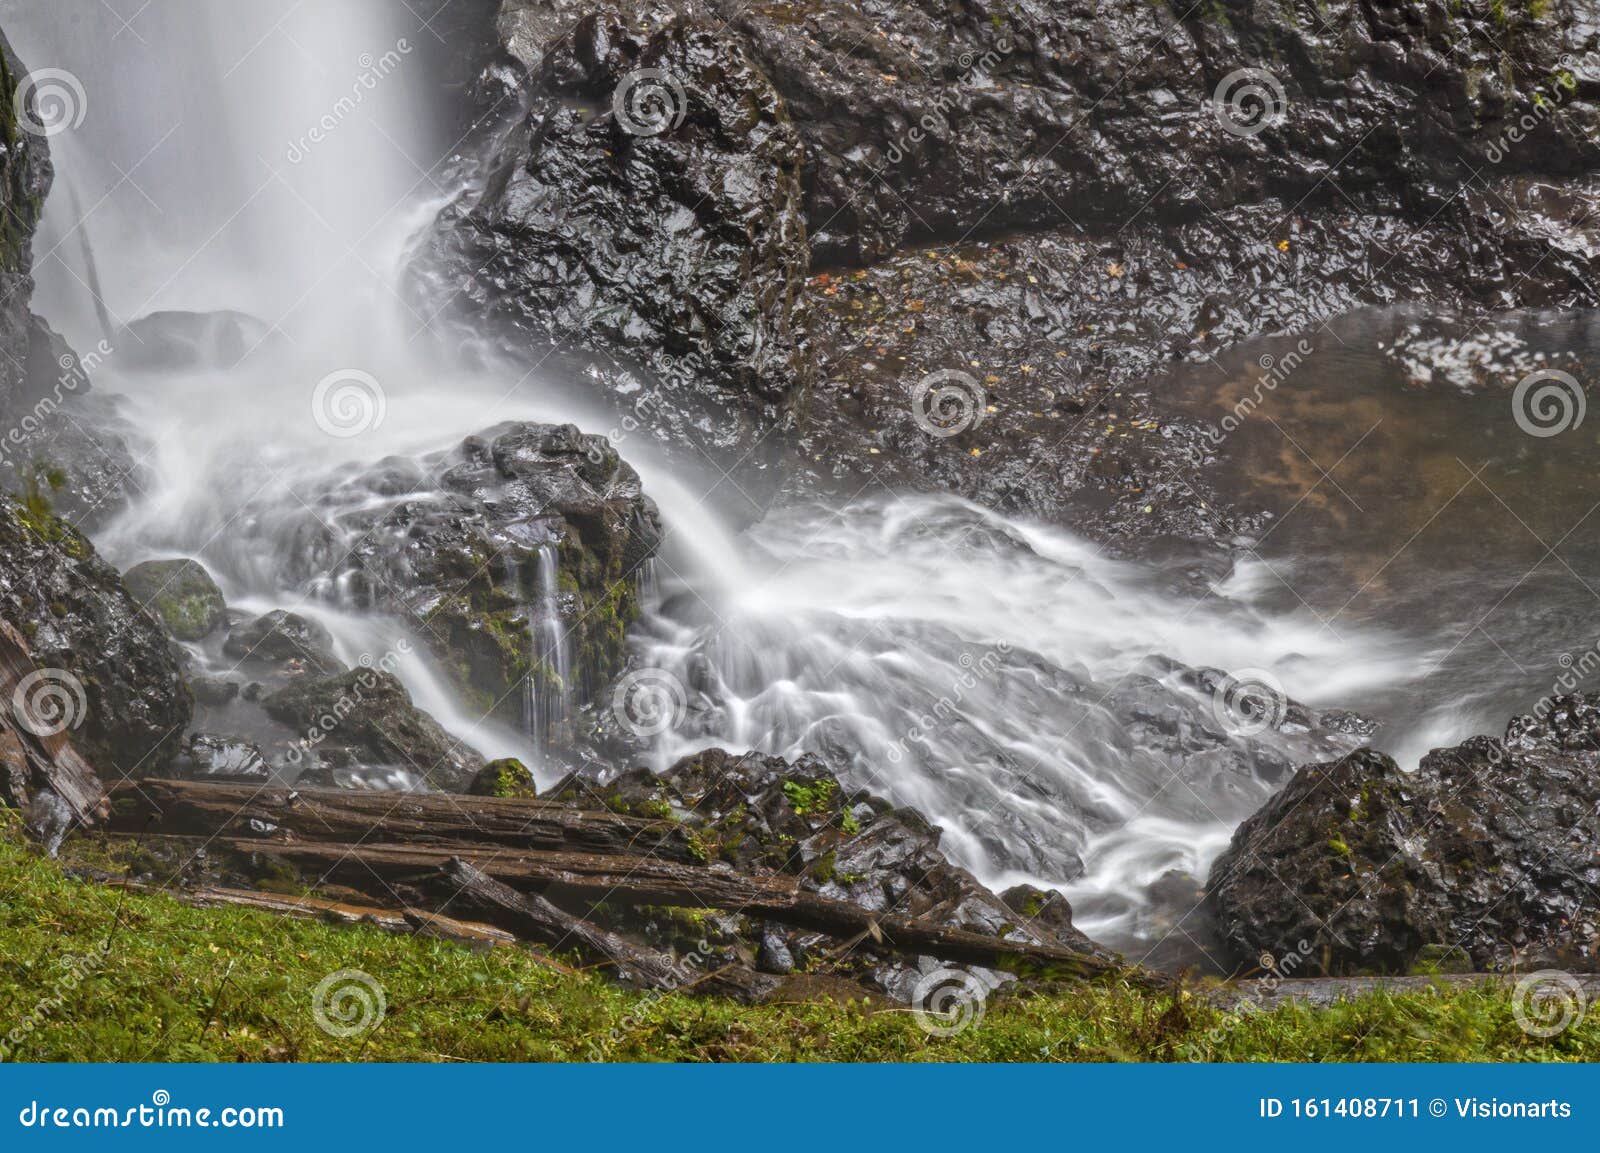 Waterfall Water Splashing At Bottom With Force On Rocky Landscape In